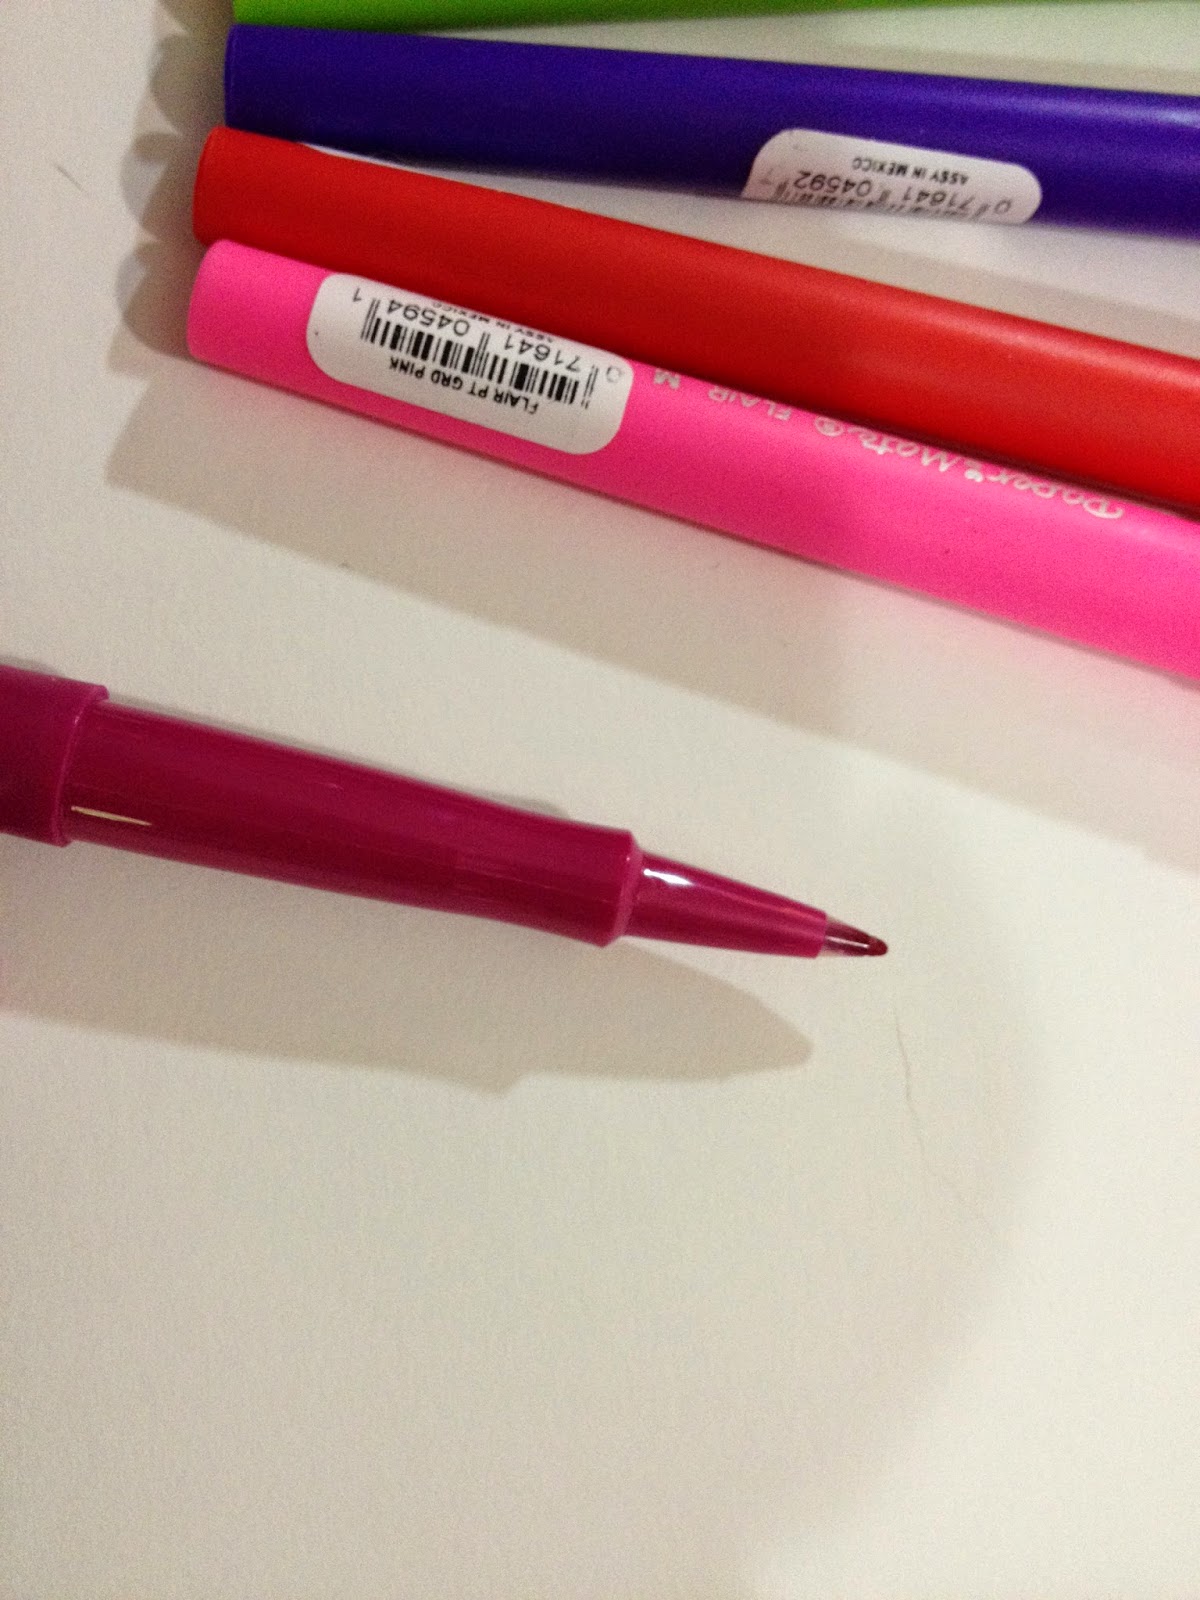 Review: New TUL Serious Ink Pens from Office Depot/Max - The Well